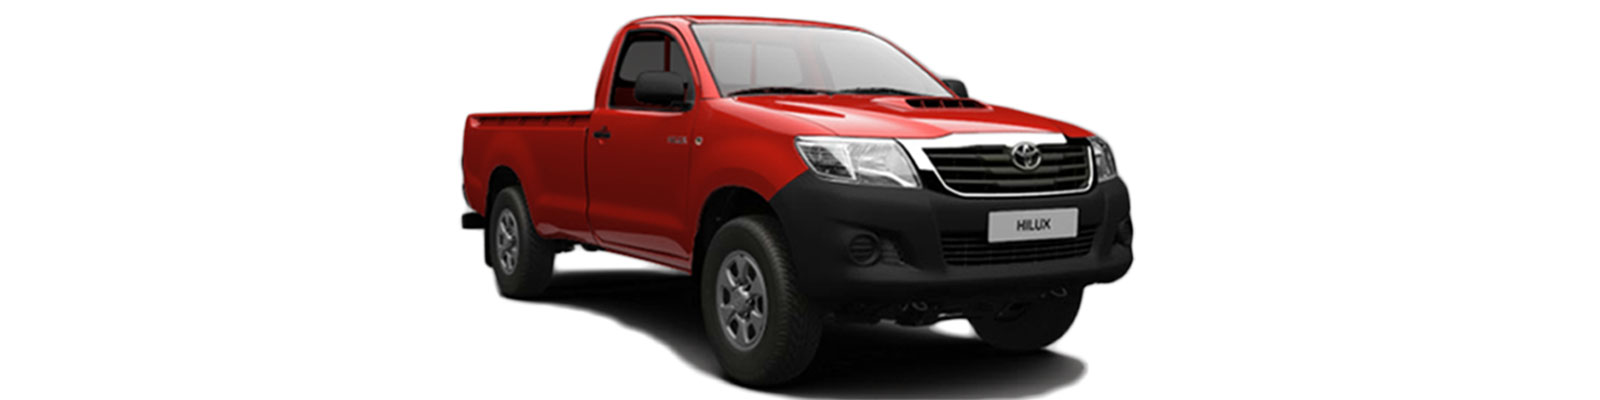 Accessories for Toyota Hilux Single Cab 2011-2016